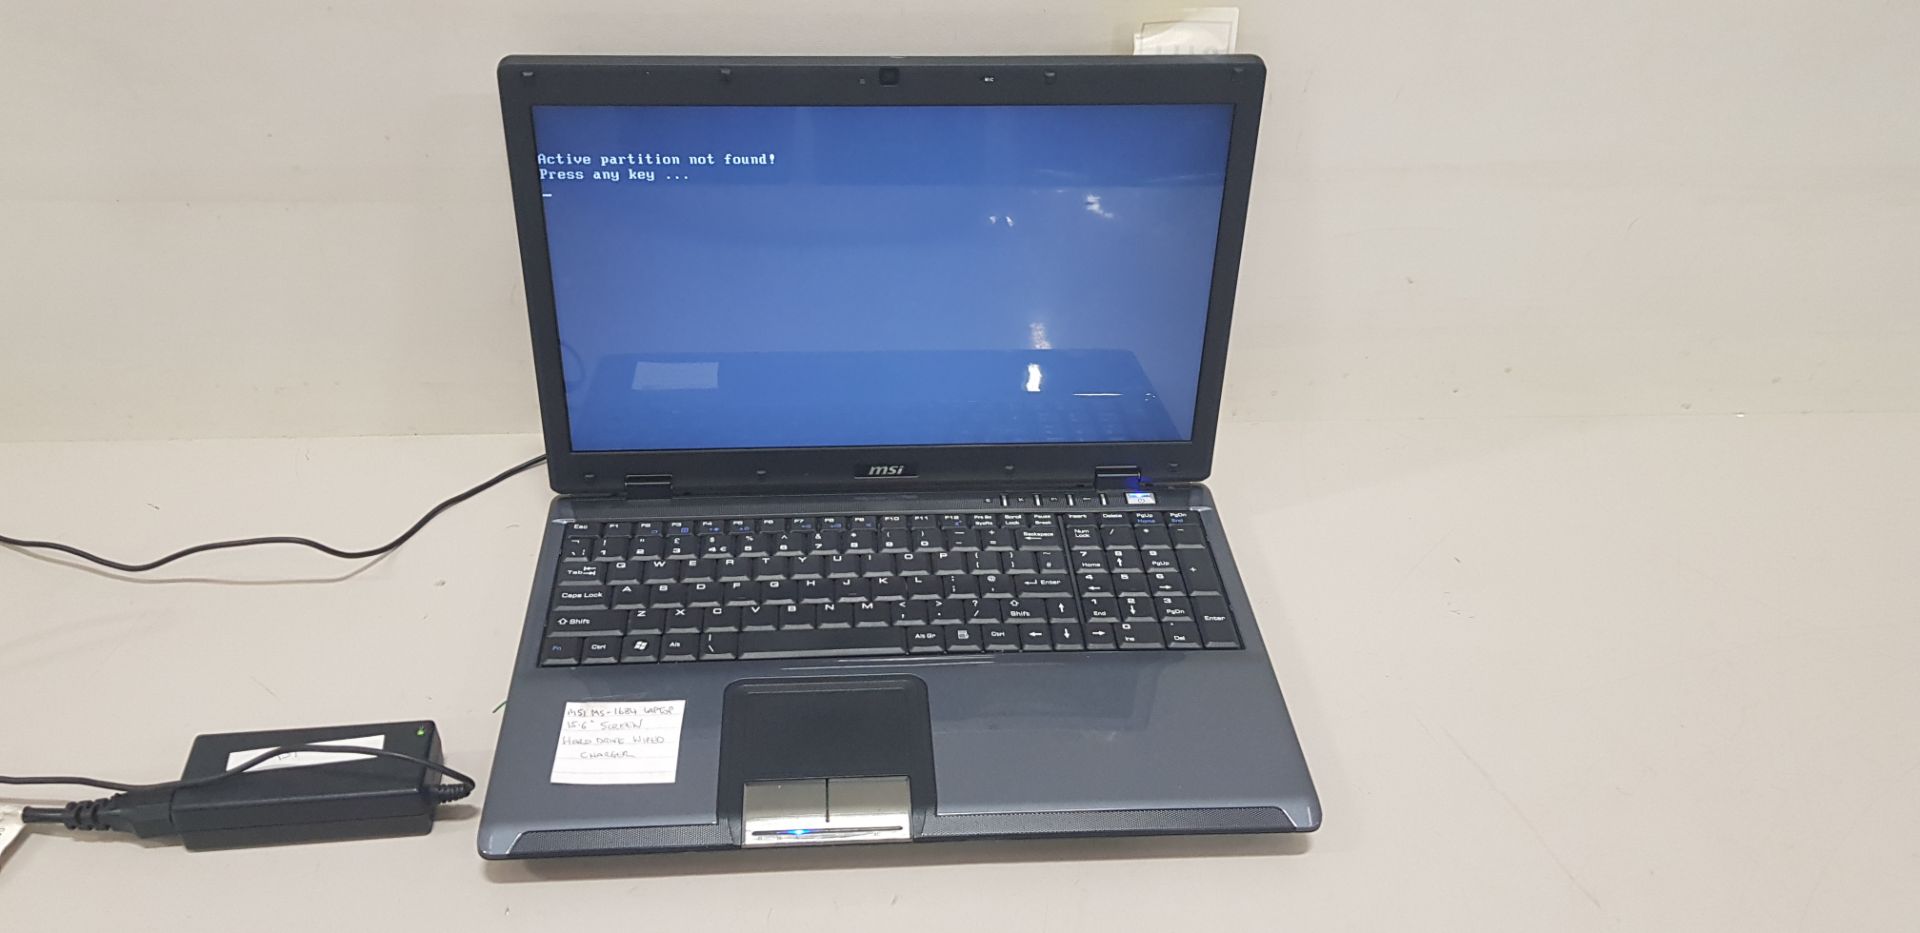 1 X MSI MS-1684 LAPTOP COMES WITH 15.6 SCREEN - HARD DRIVE WIPED - NO OS - COMES WITH CHARGER